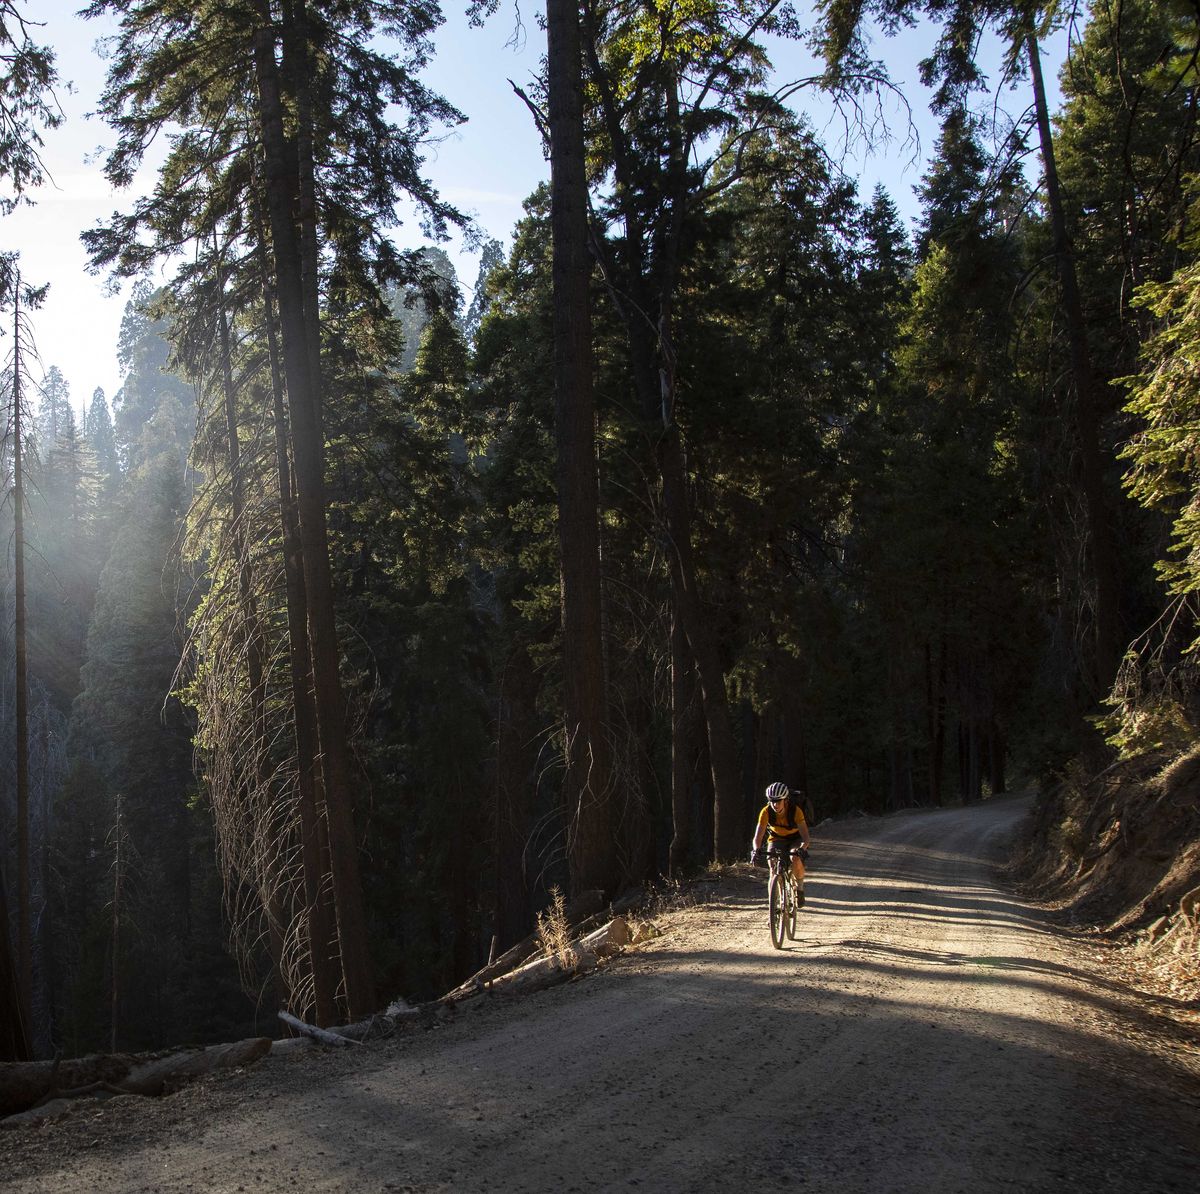 lael wilcox riding a gravel road in the sierra nevada mountains